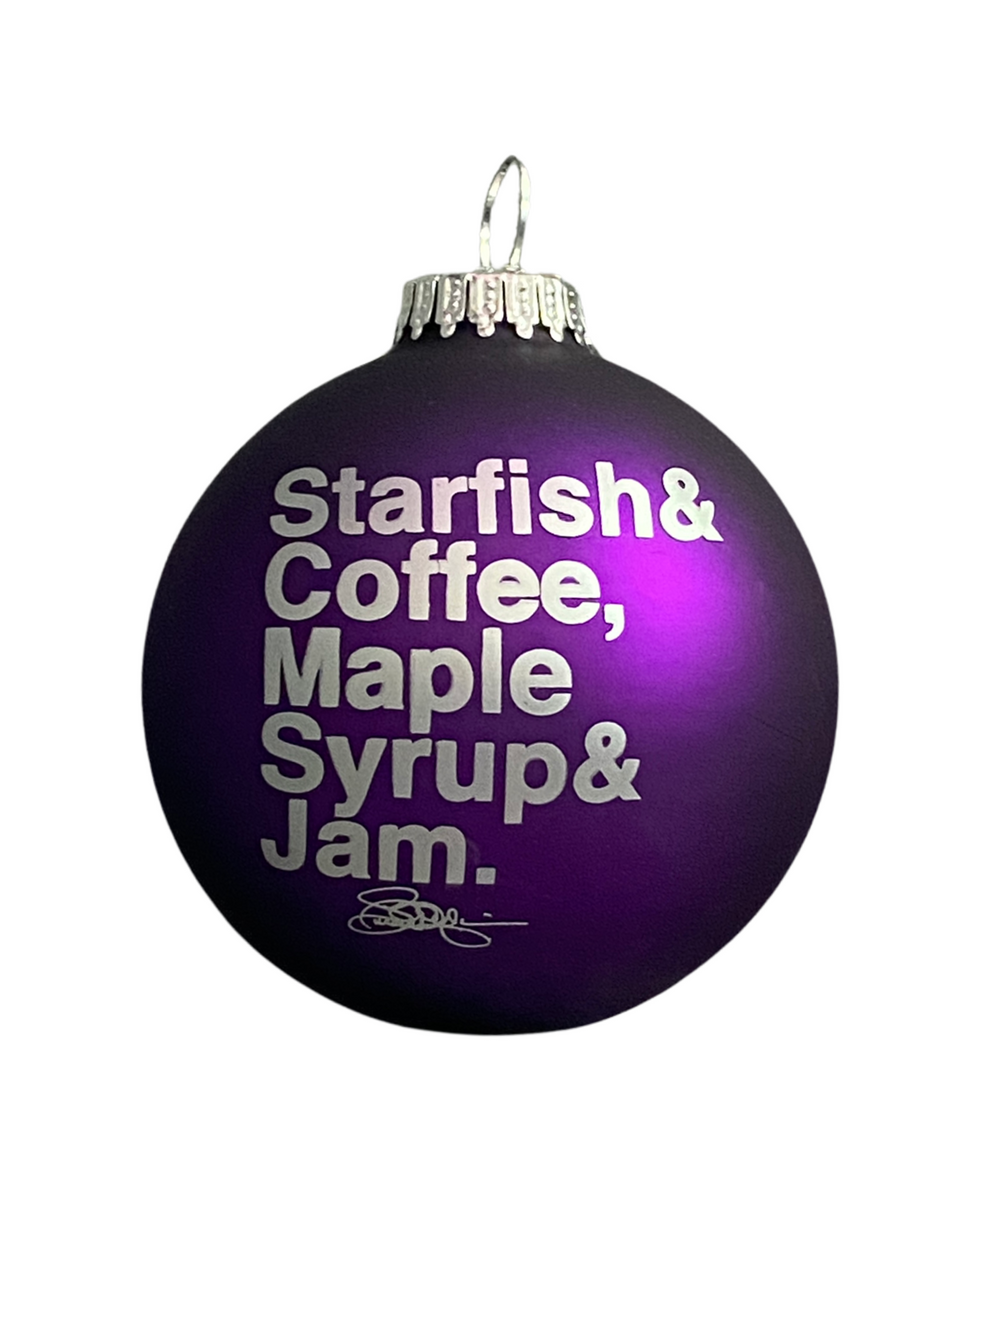 Starfish & Coffee USA Official Holiday Ornament Brand New Boxed Prince